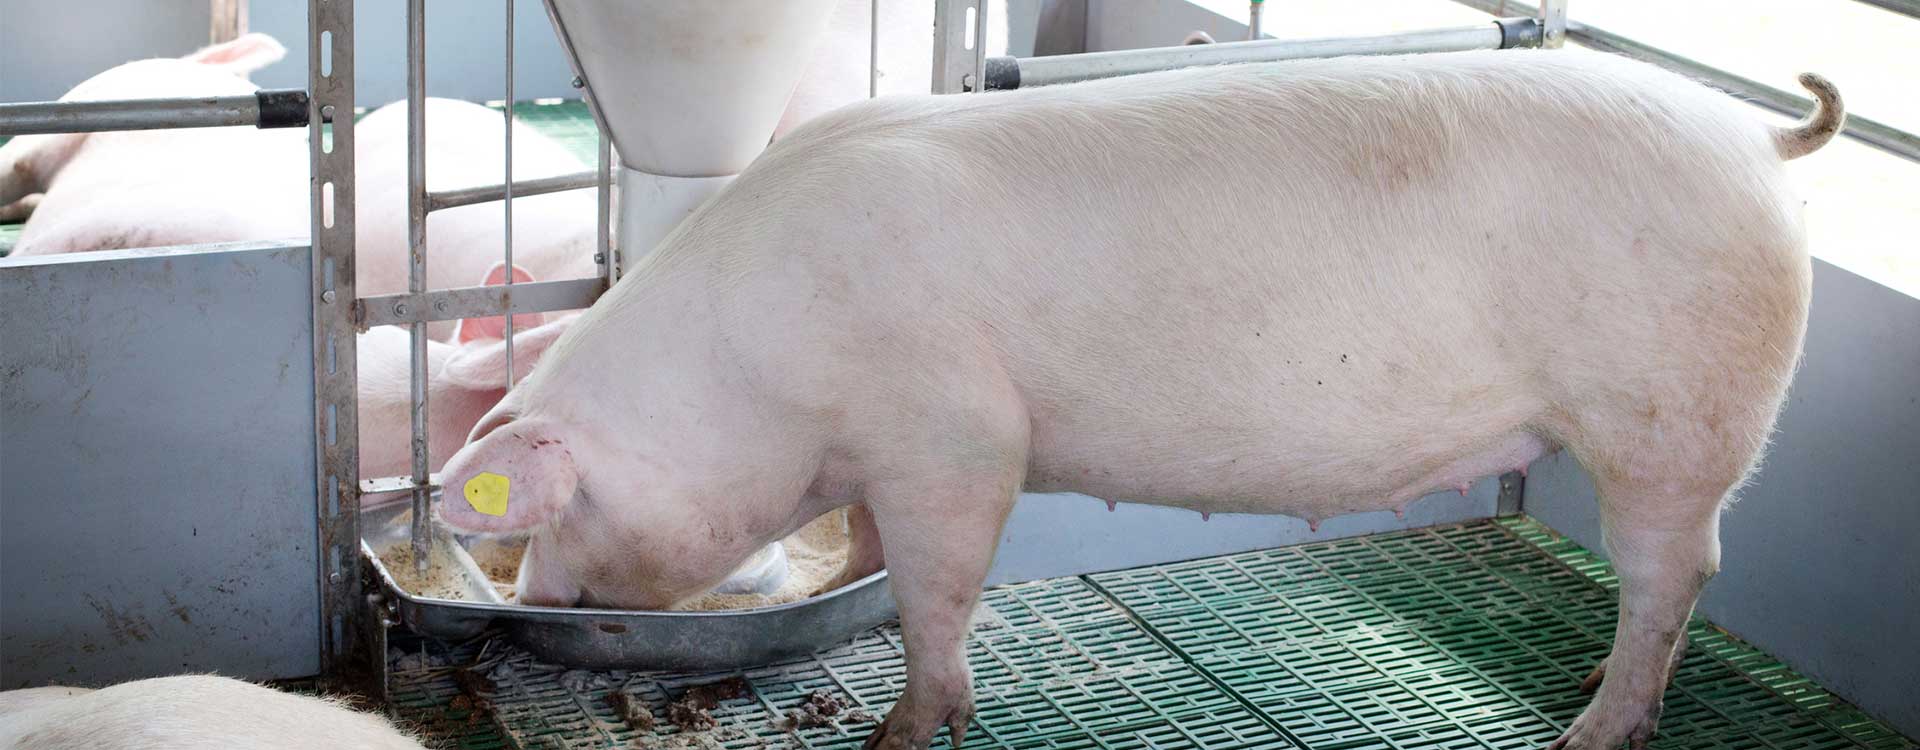 domestic-pig-eating-from-self-feeder